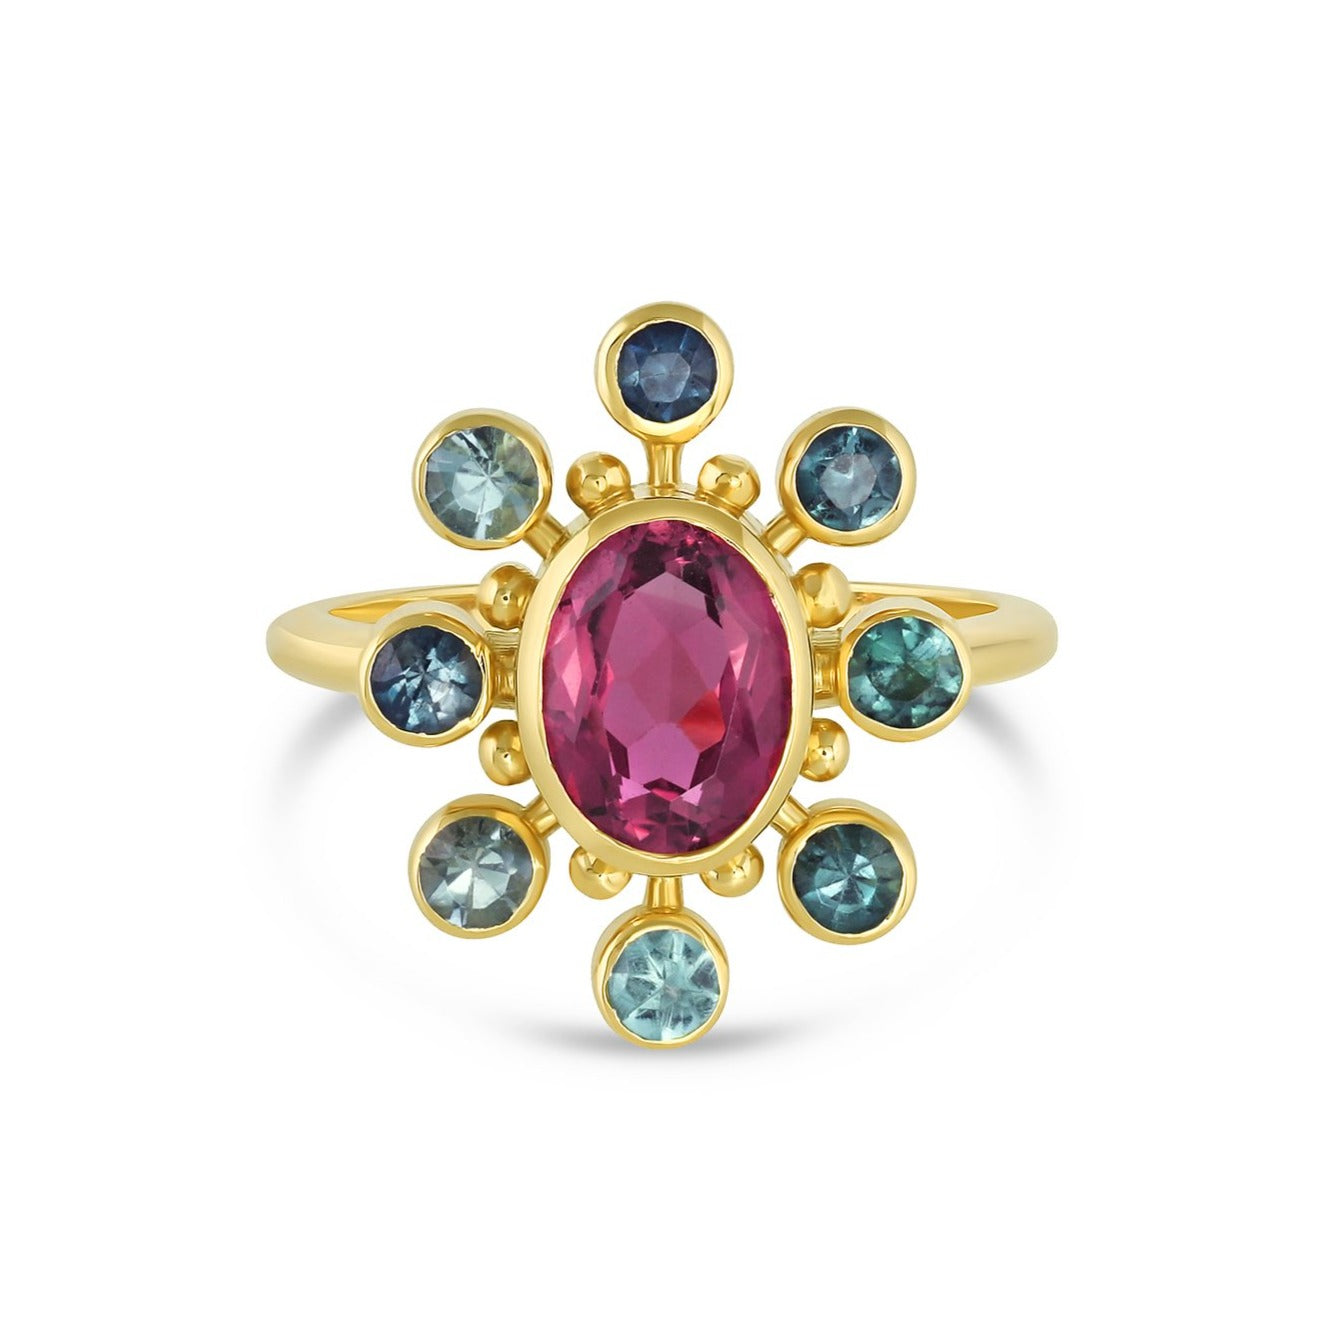 18k yellow gold cosmos ring with pink tourmaline center stone and teal tourmaline and gold halo on white background.